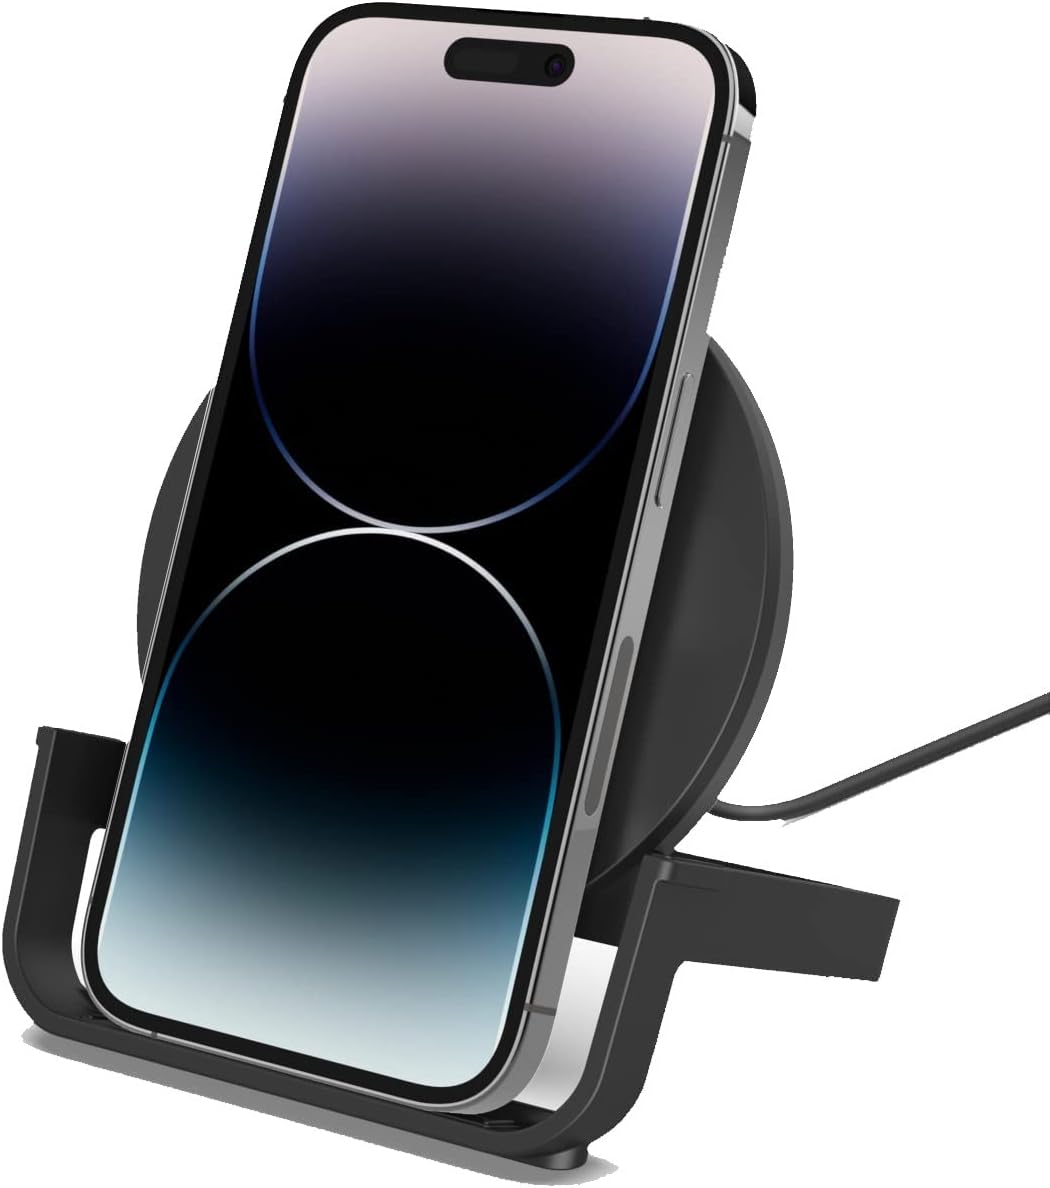 Belkin Quick Charge 10W Wireless Charger - Qi-Certified - Includes AC Adapter - Black